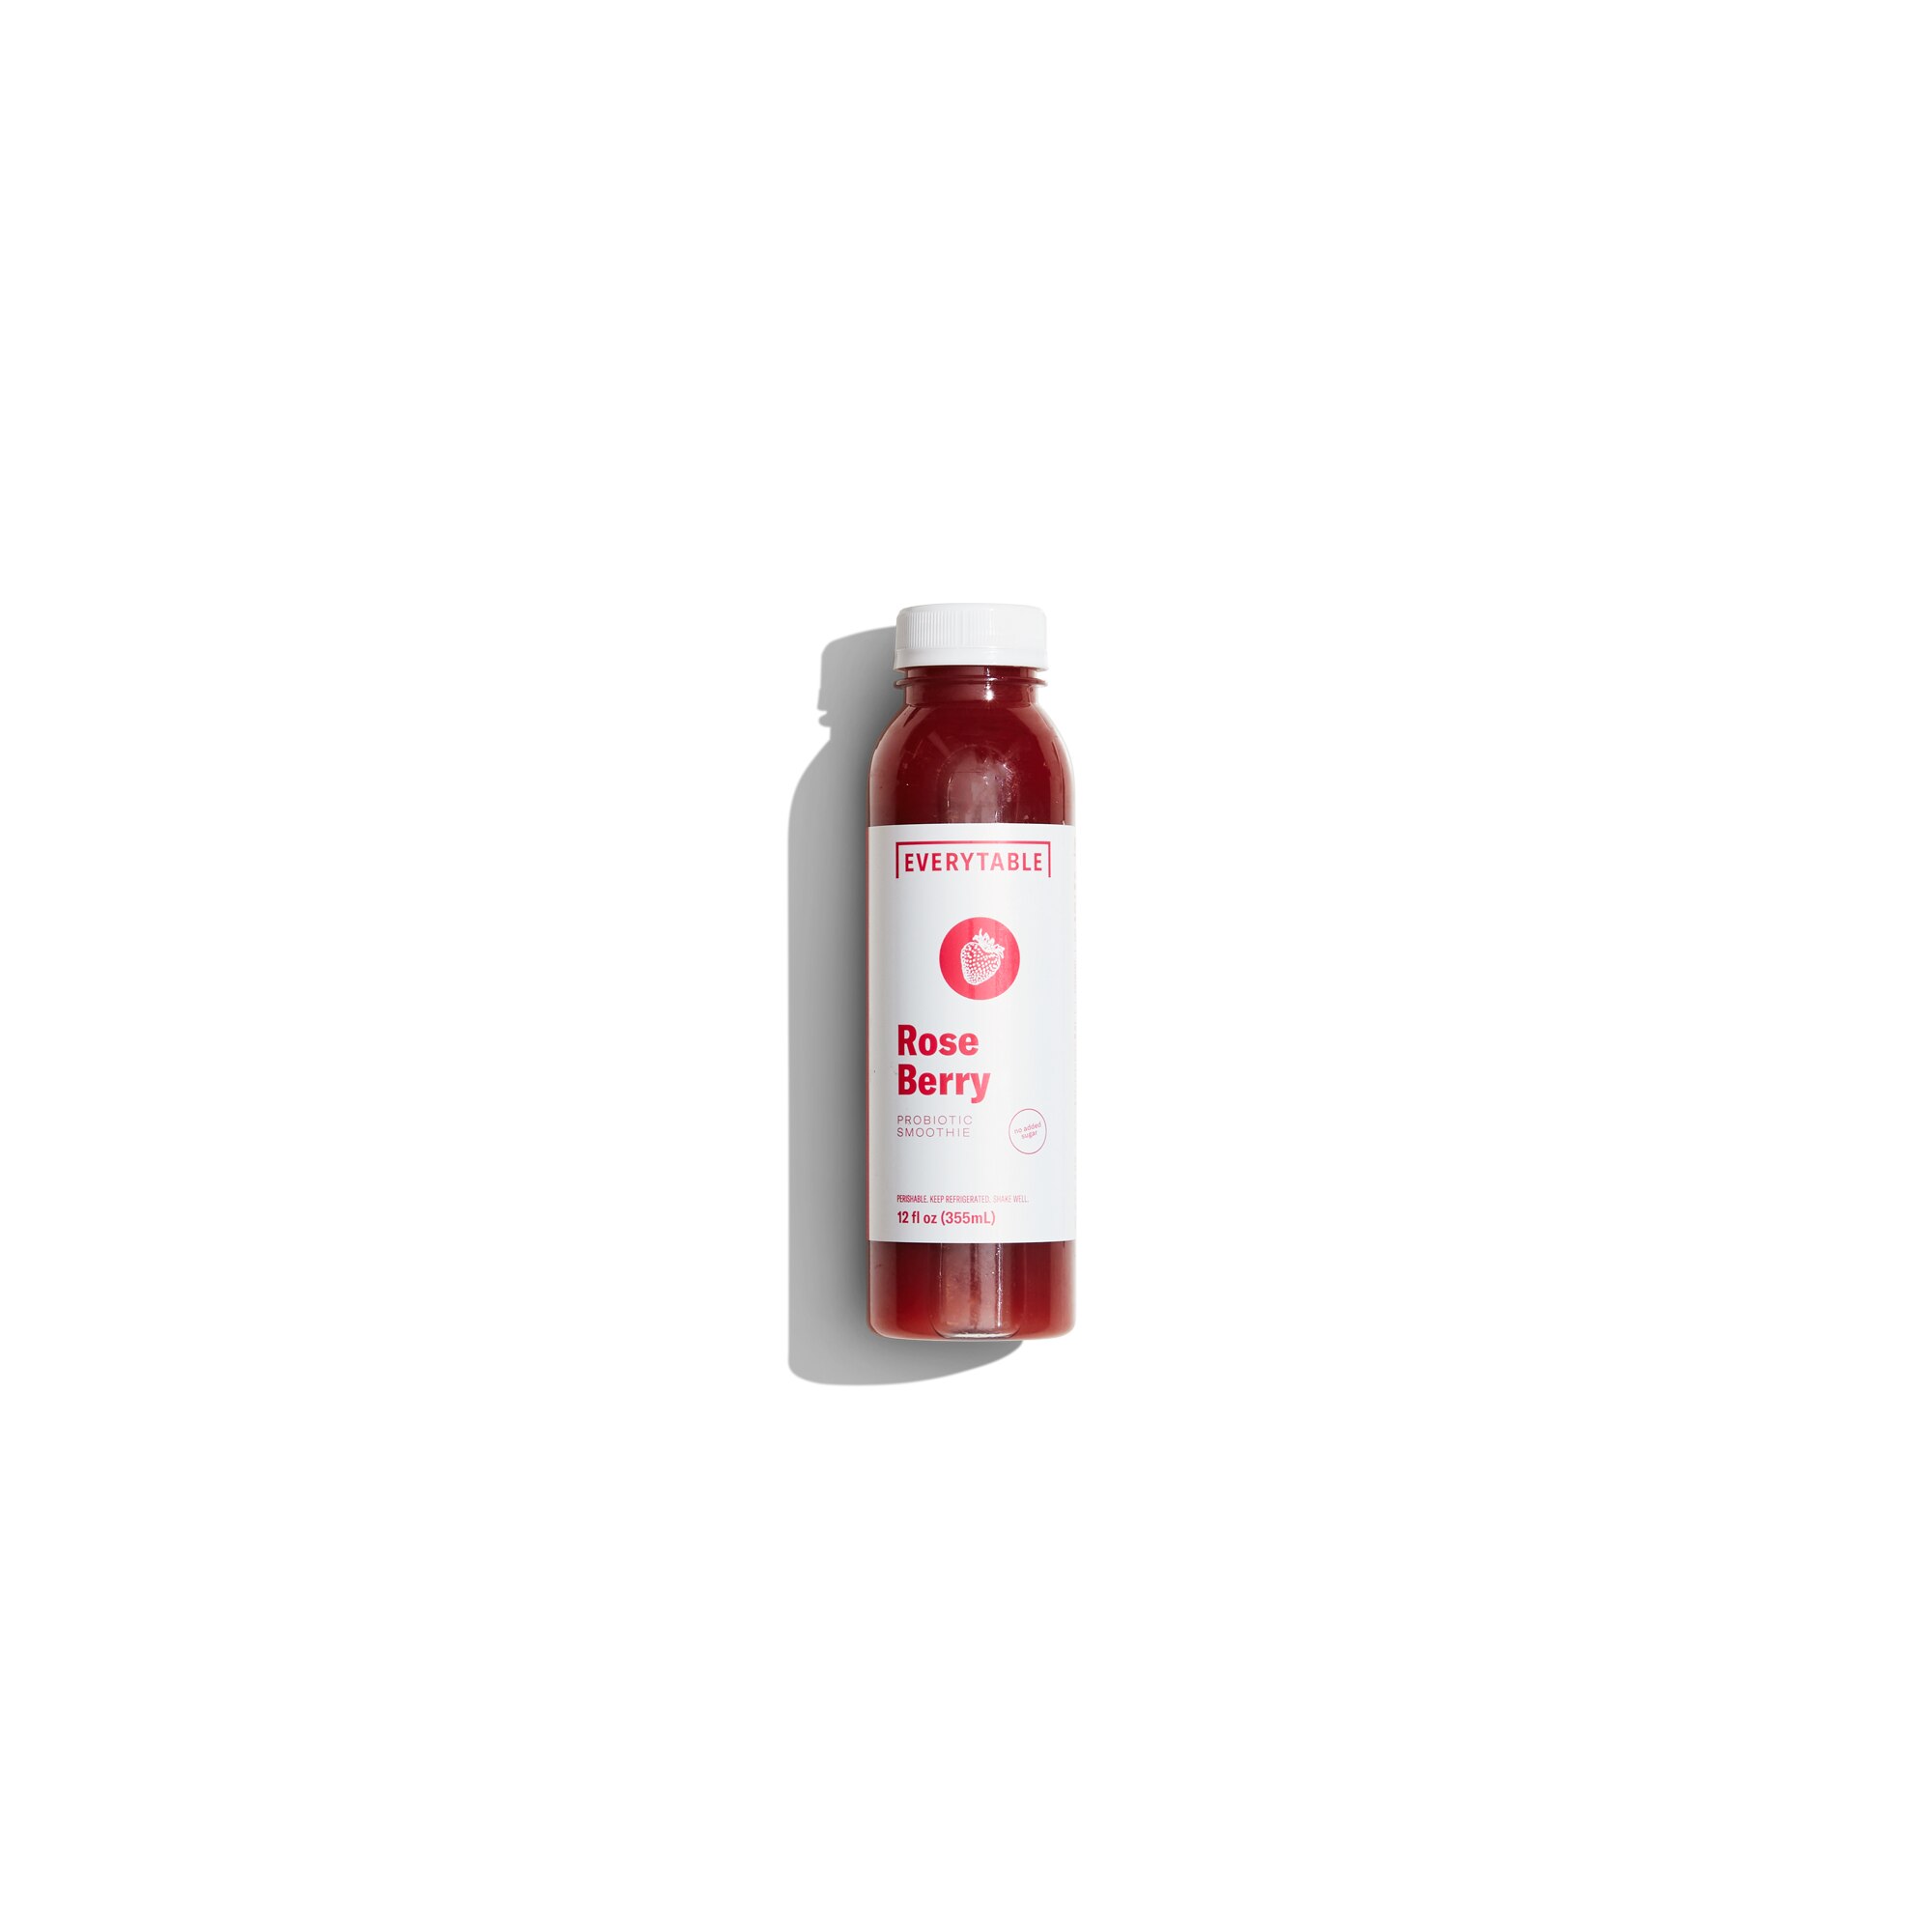 Everytable, Rose Berry Smoothie, 12 oz